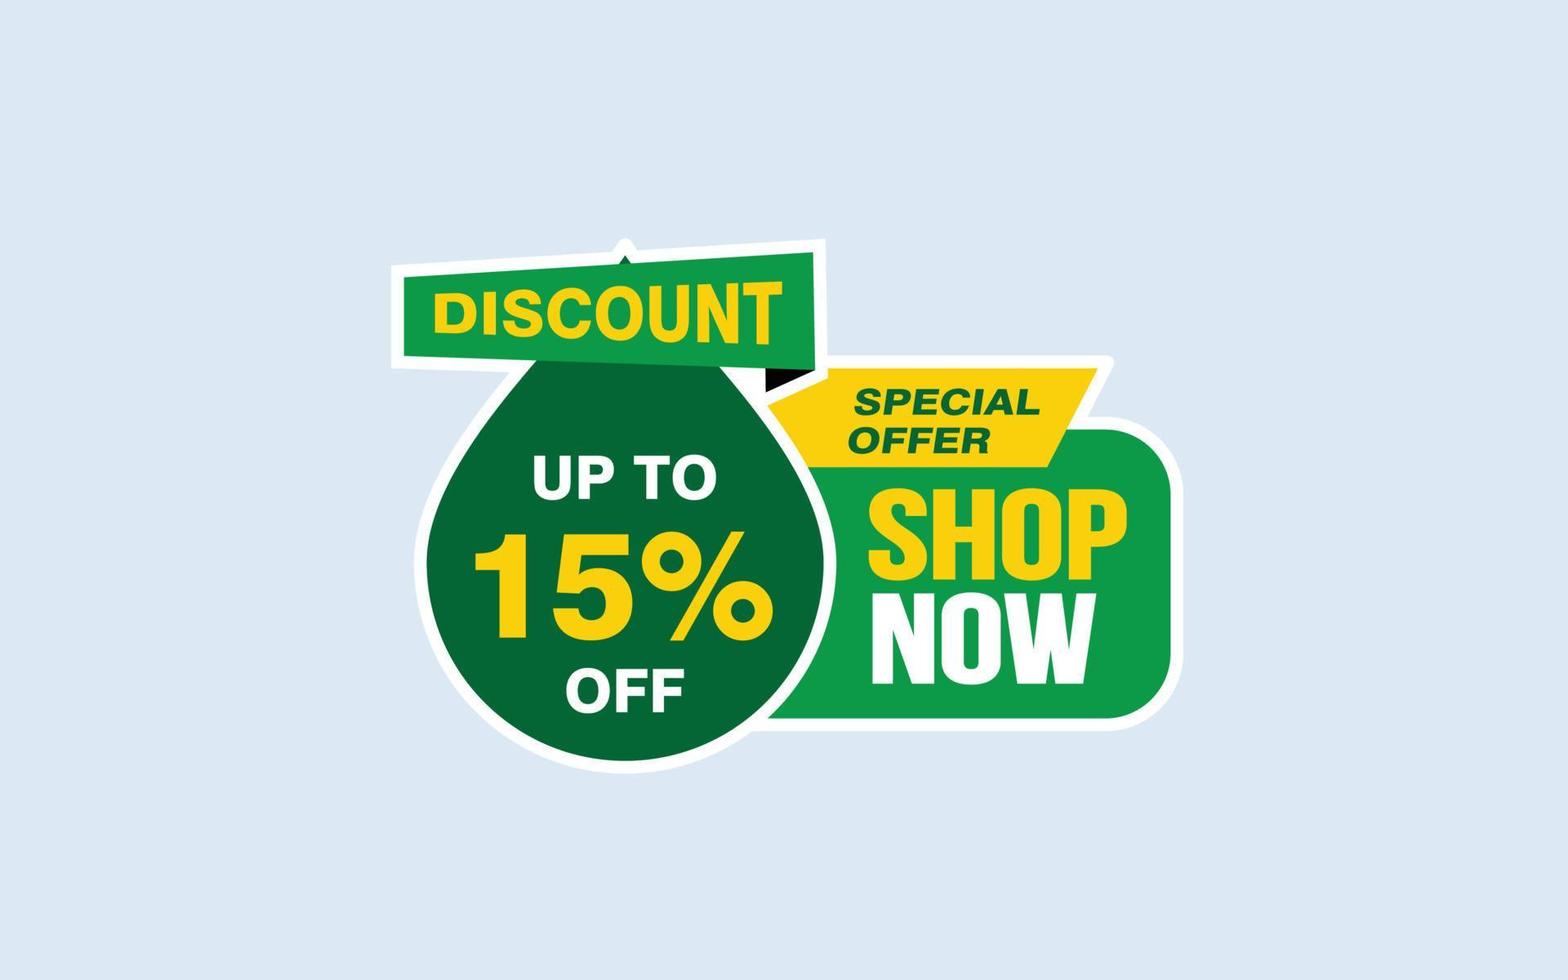 15 Percent SHOP NOW offer, clearance, promotion banner layout with sticker style. vector